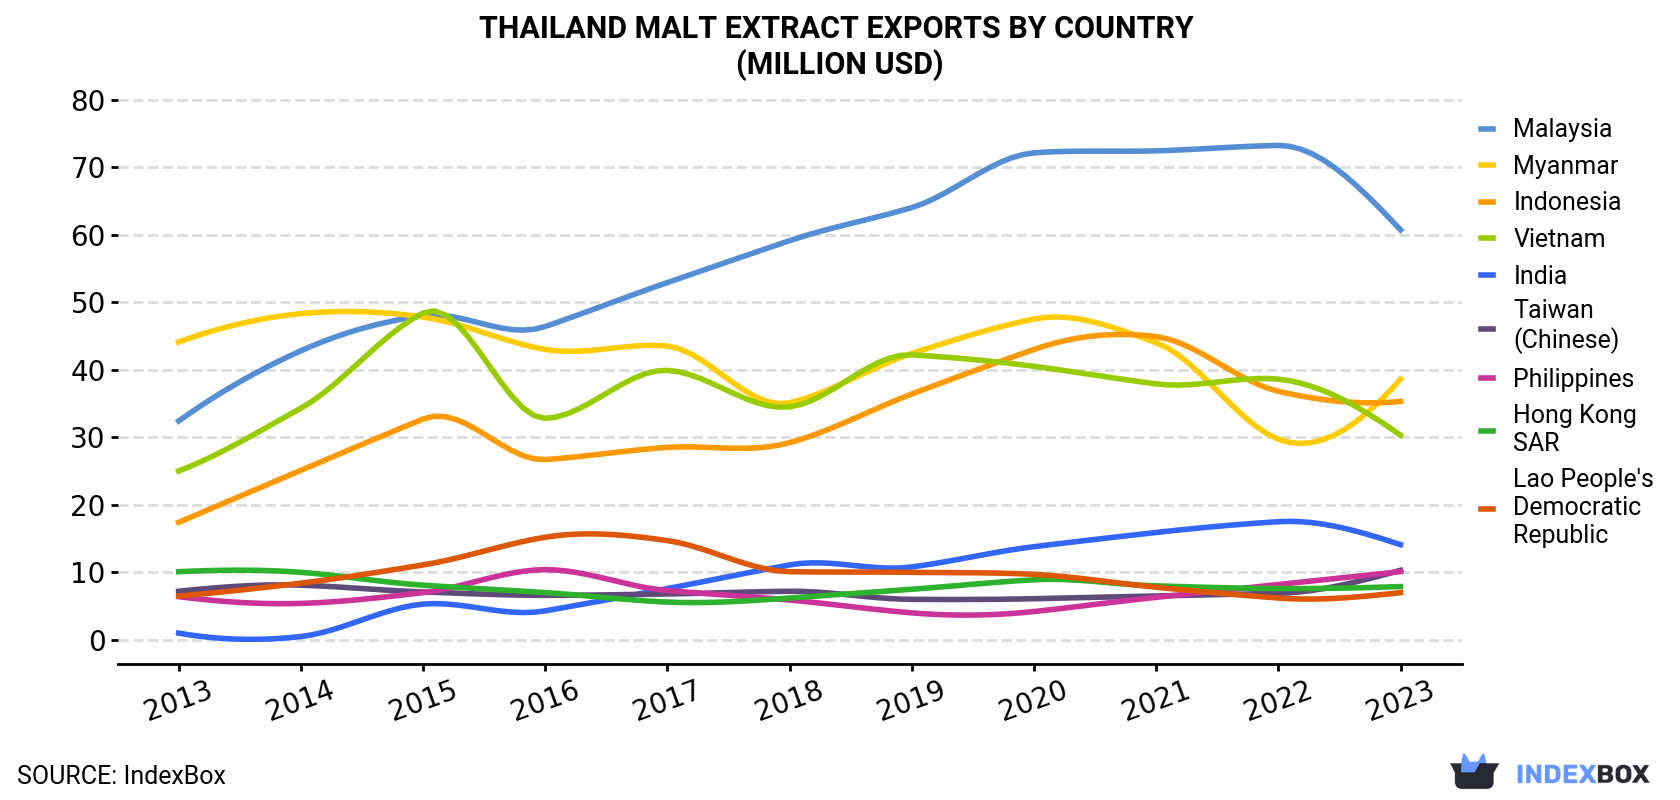 Thailand Malt Extract Exports By Country (Million USD)